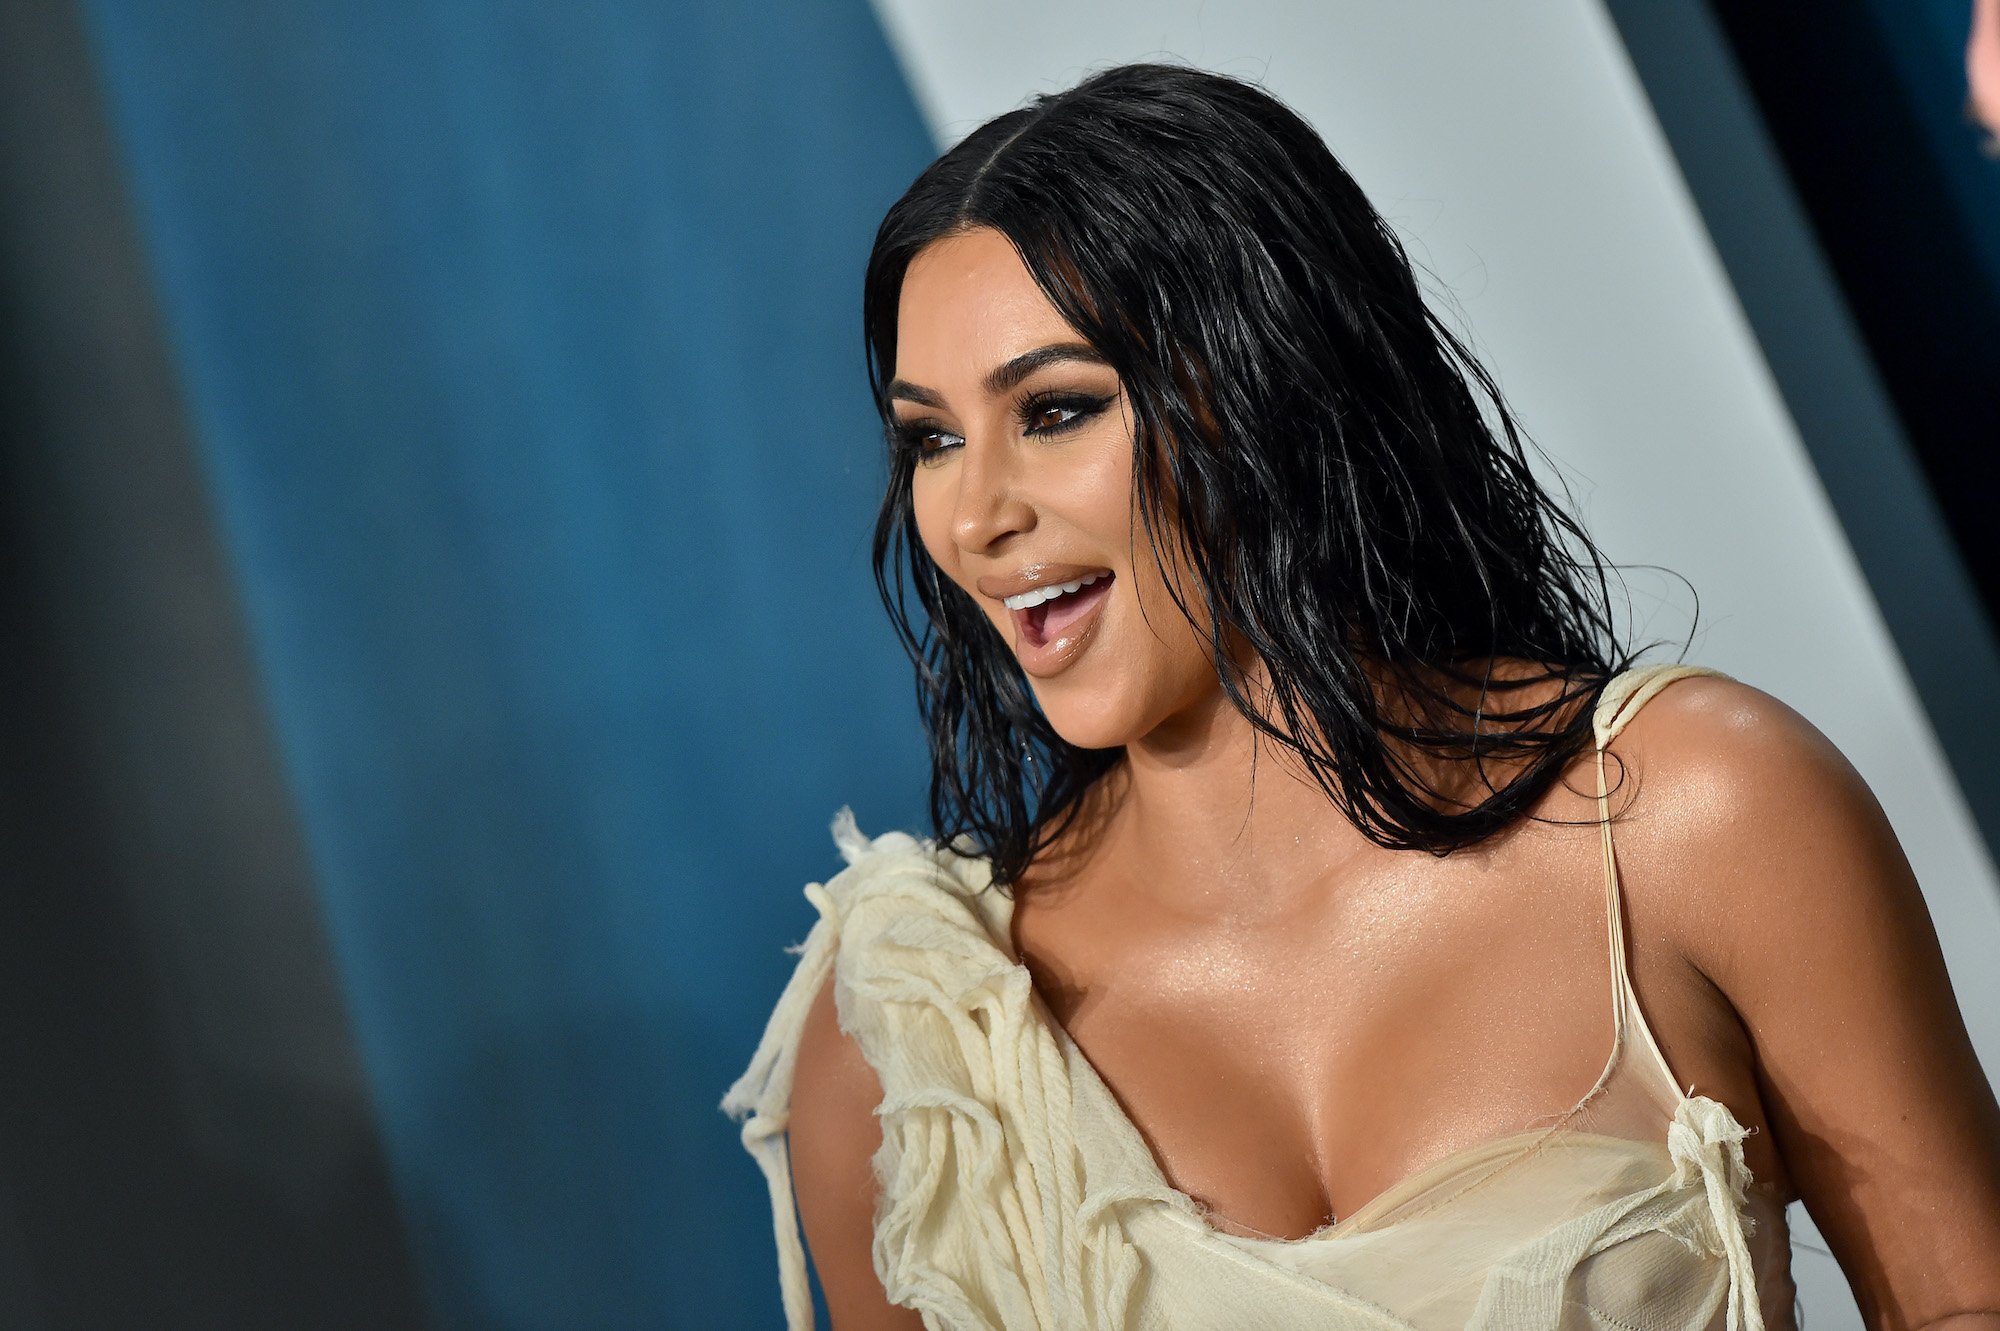 This Kim Kardashian Video Looks So Good Fans Barely Believe It’s Real